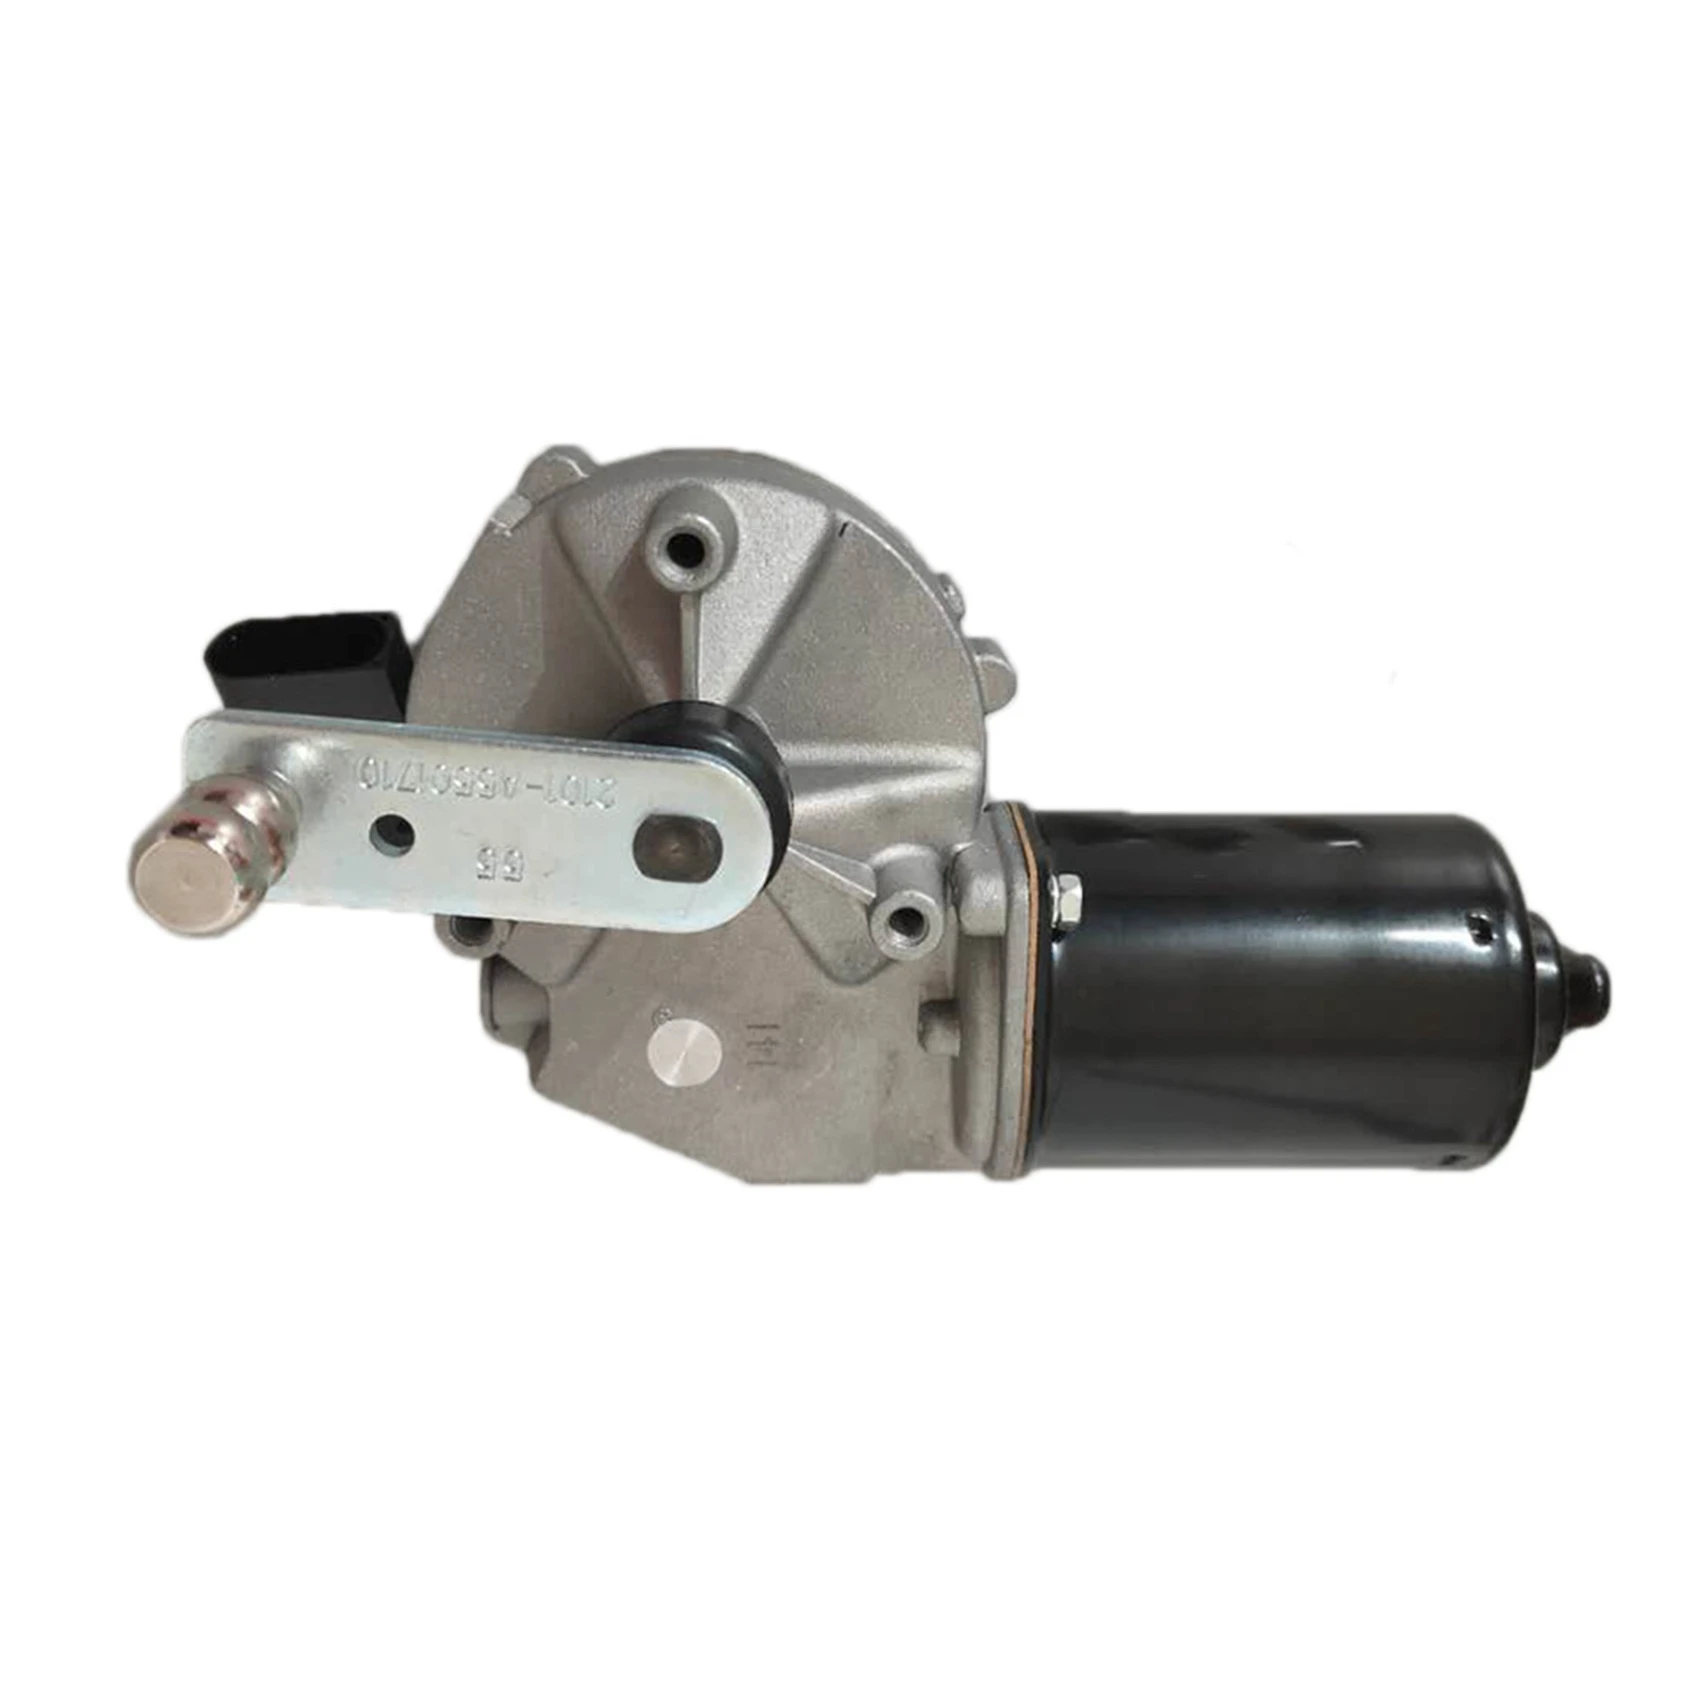 

A1648201742 Front Windshield Wiper Motor for Mercedes-Benz GL Level X164 2006-2012 M Class W164 2005-2011